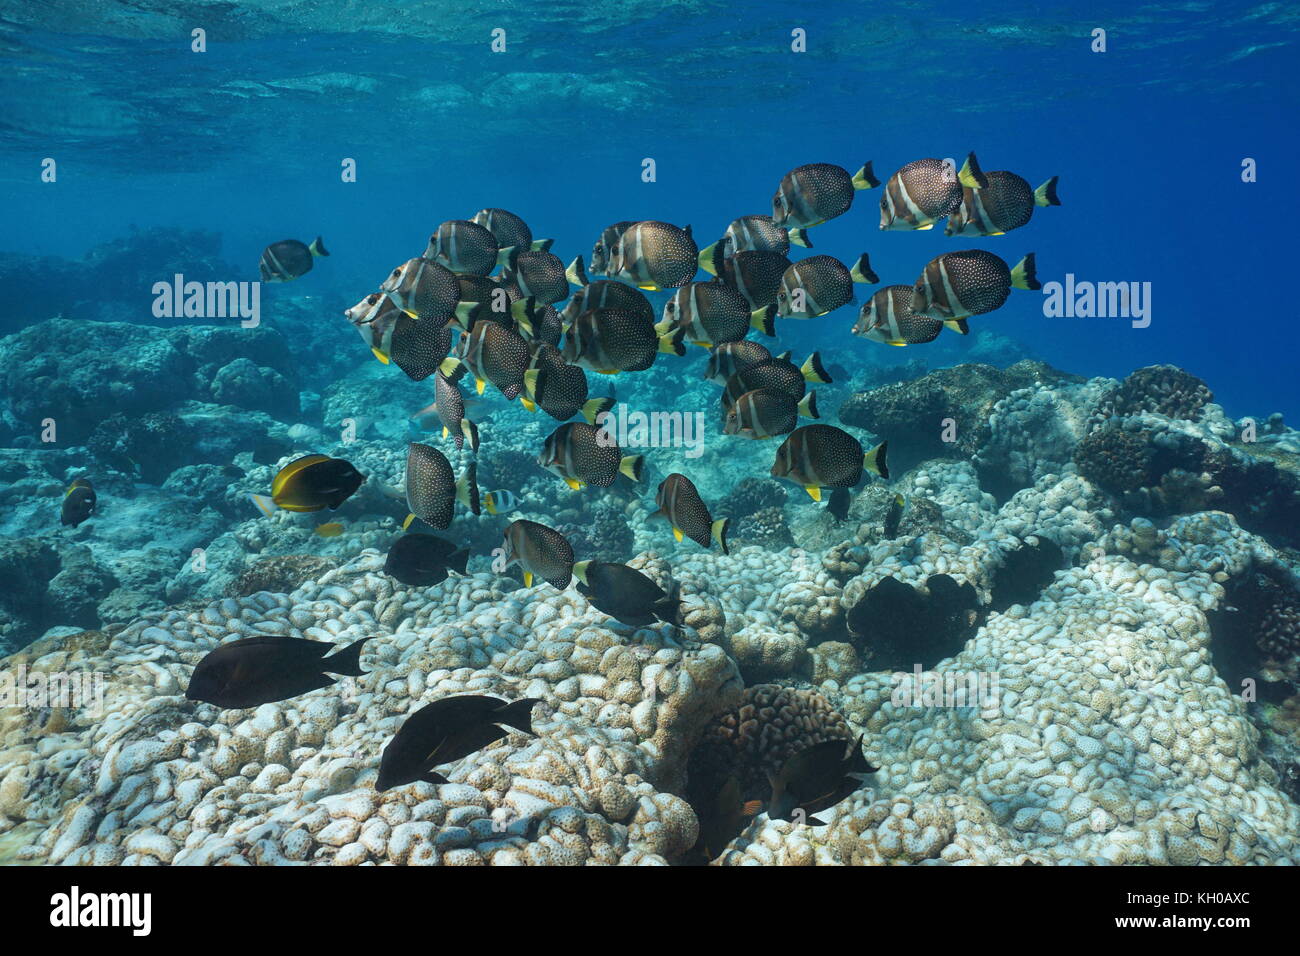 Underwater a school of fish, whitespotted surgeonfish, over a coral reef, Rangiroa, Tuamotus, Pacific ocean, French Polynesia, Oceania Stock Photo